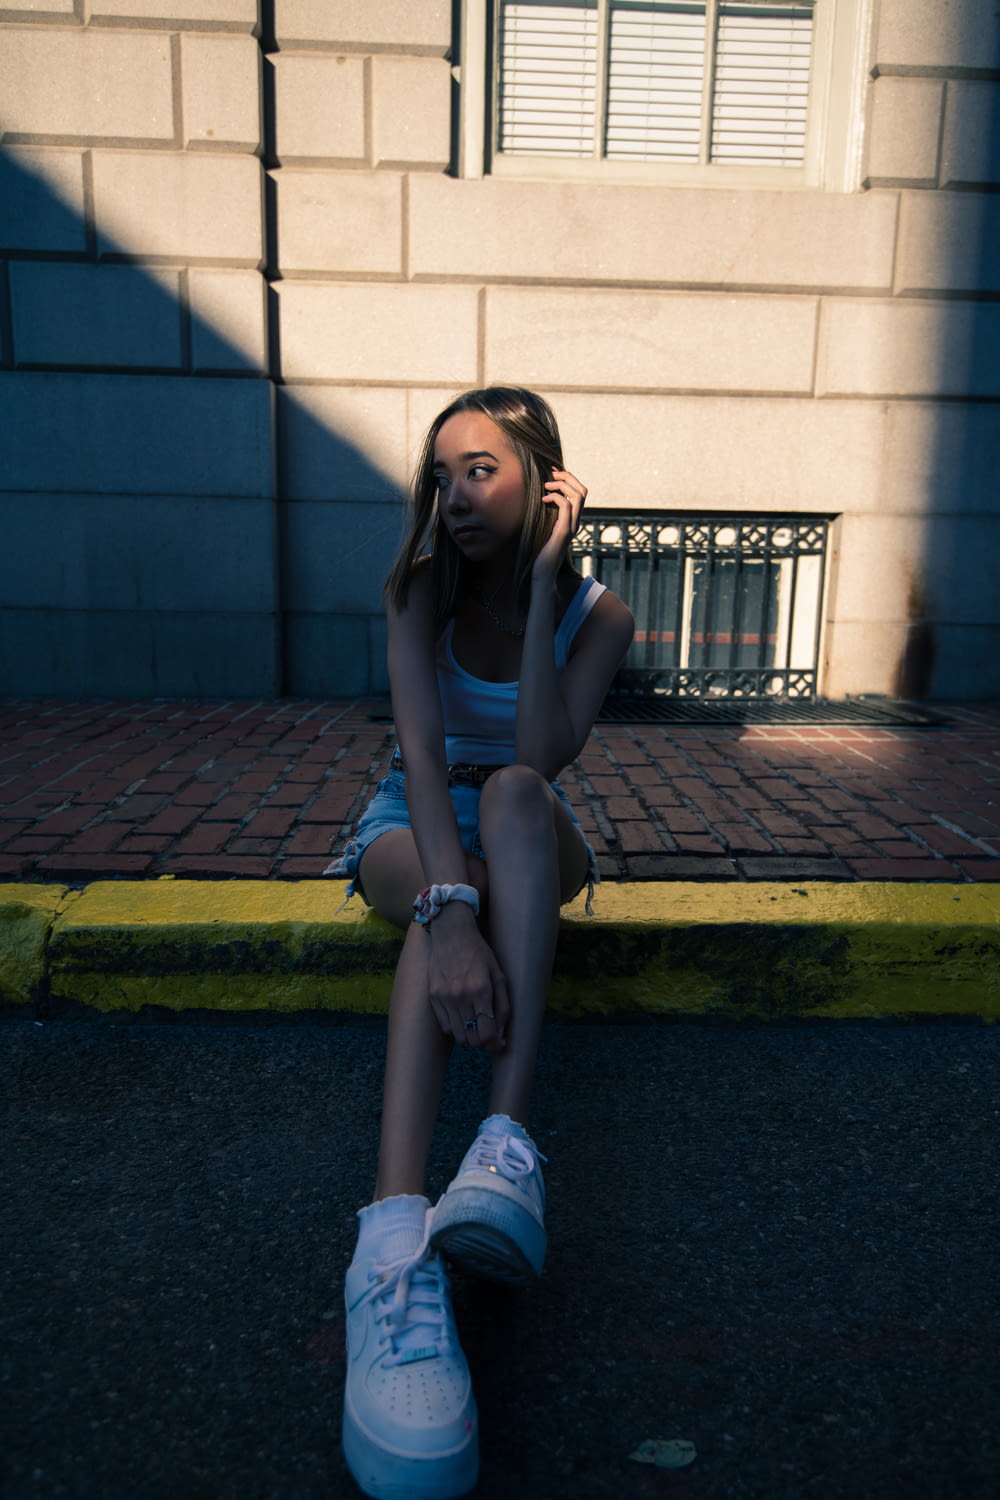 woman in black tank top and blue denim shorts sitting on gray concrete pavement